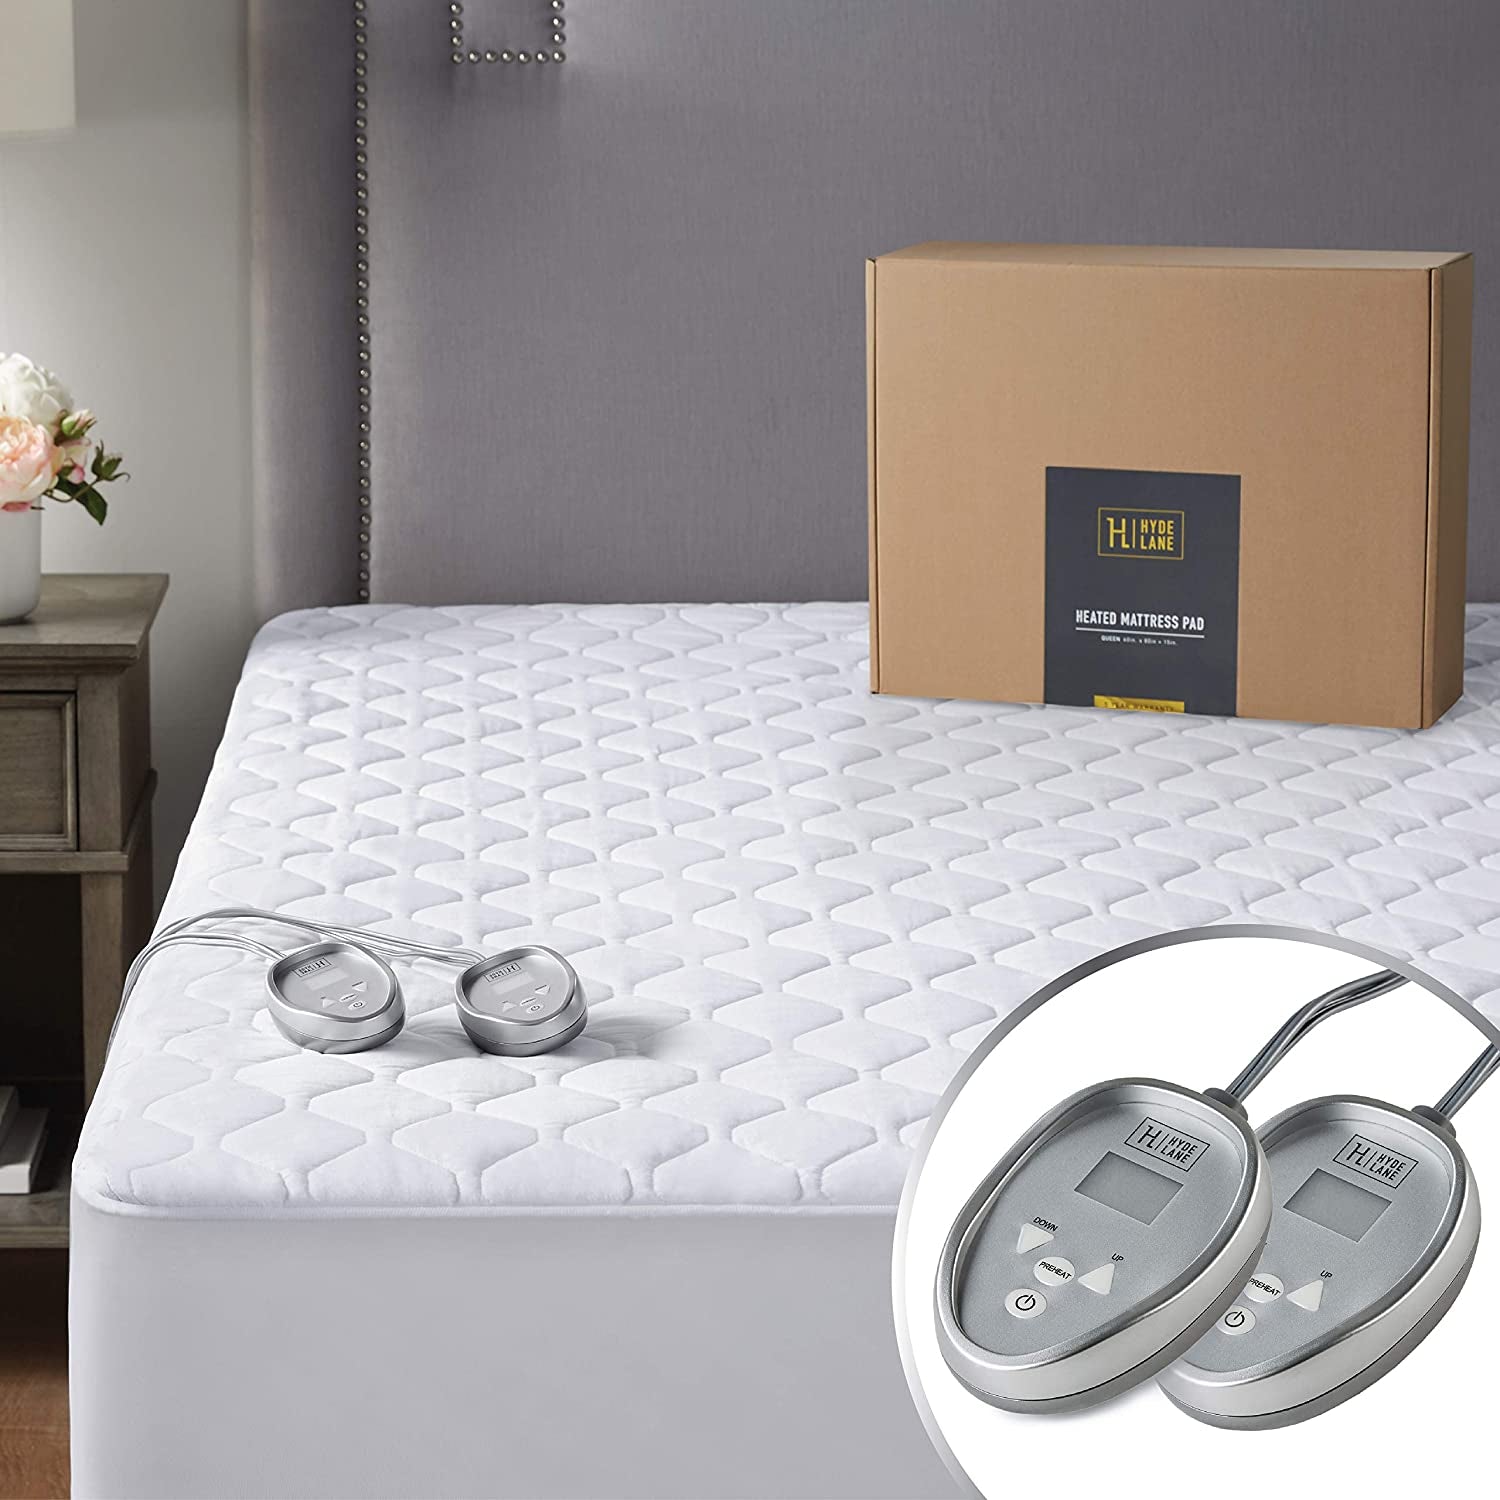 Premium Mattress Heating Pad King Size 78X80 Inch | Quilted Cotton Electrical Mattress Pad with 20 Heat Setting Dual Controller & Auto Shut off | Relieve Sore Muscles/Joints